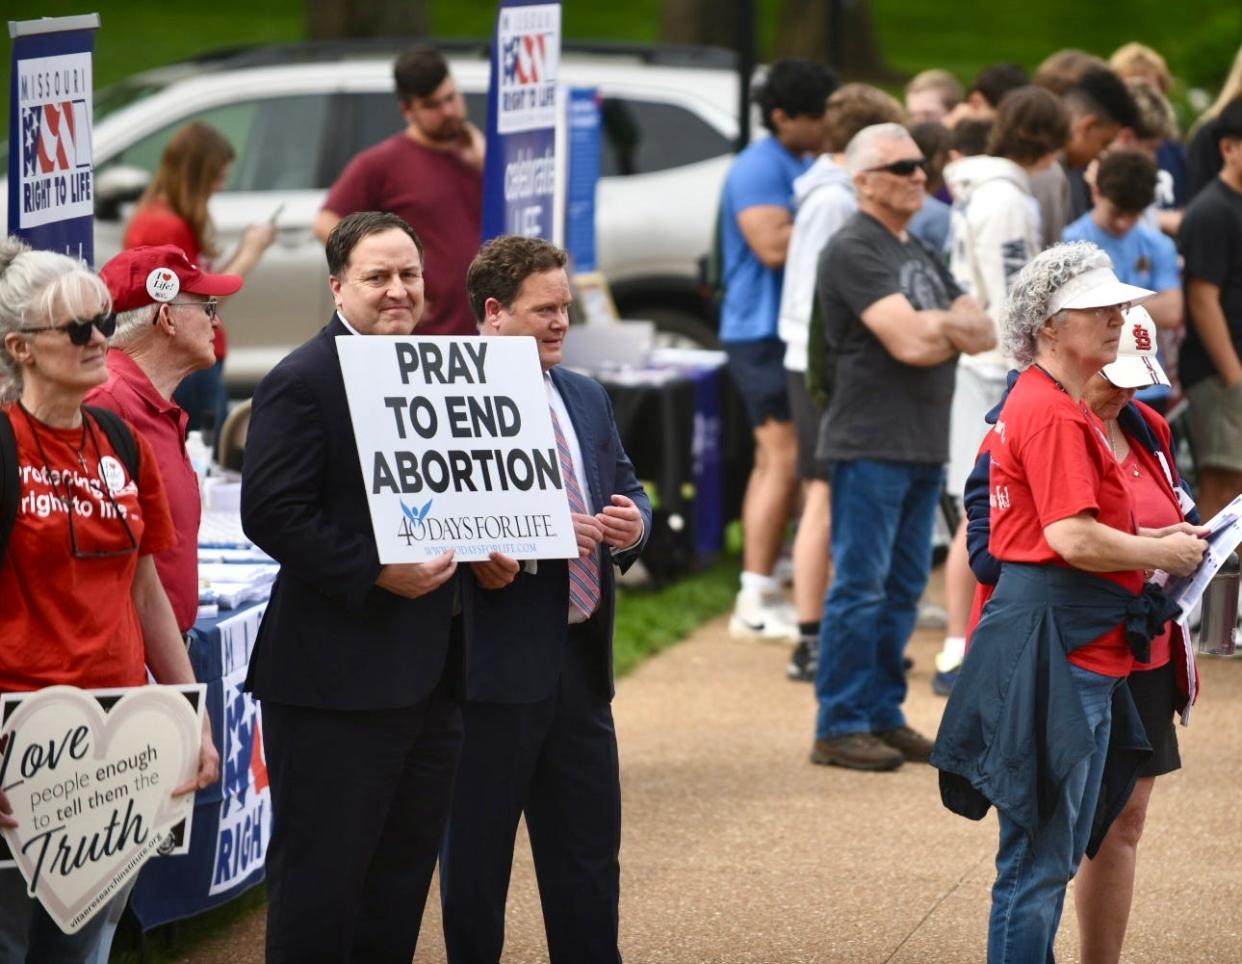 Missouri Secretary of State Jay Ashcroft joined the Midwest March for Life on Wednesday at the Missouri State Capitol. “I think regardless of what the legislature does, the people of this state – with hard work – can protect all life in this state,” Ashcroft said.